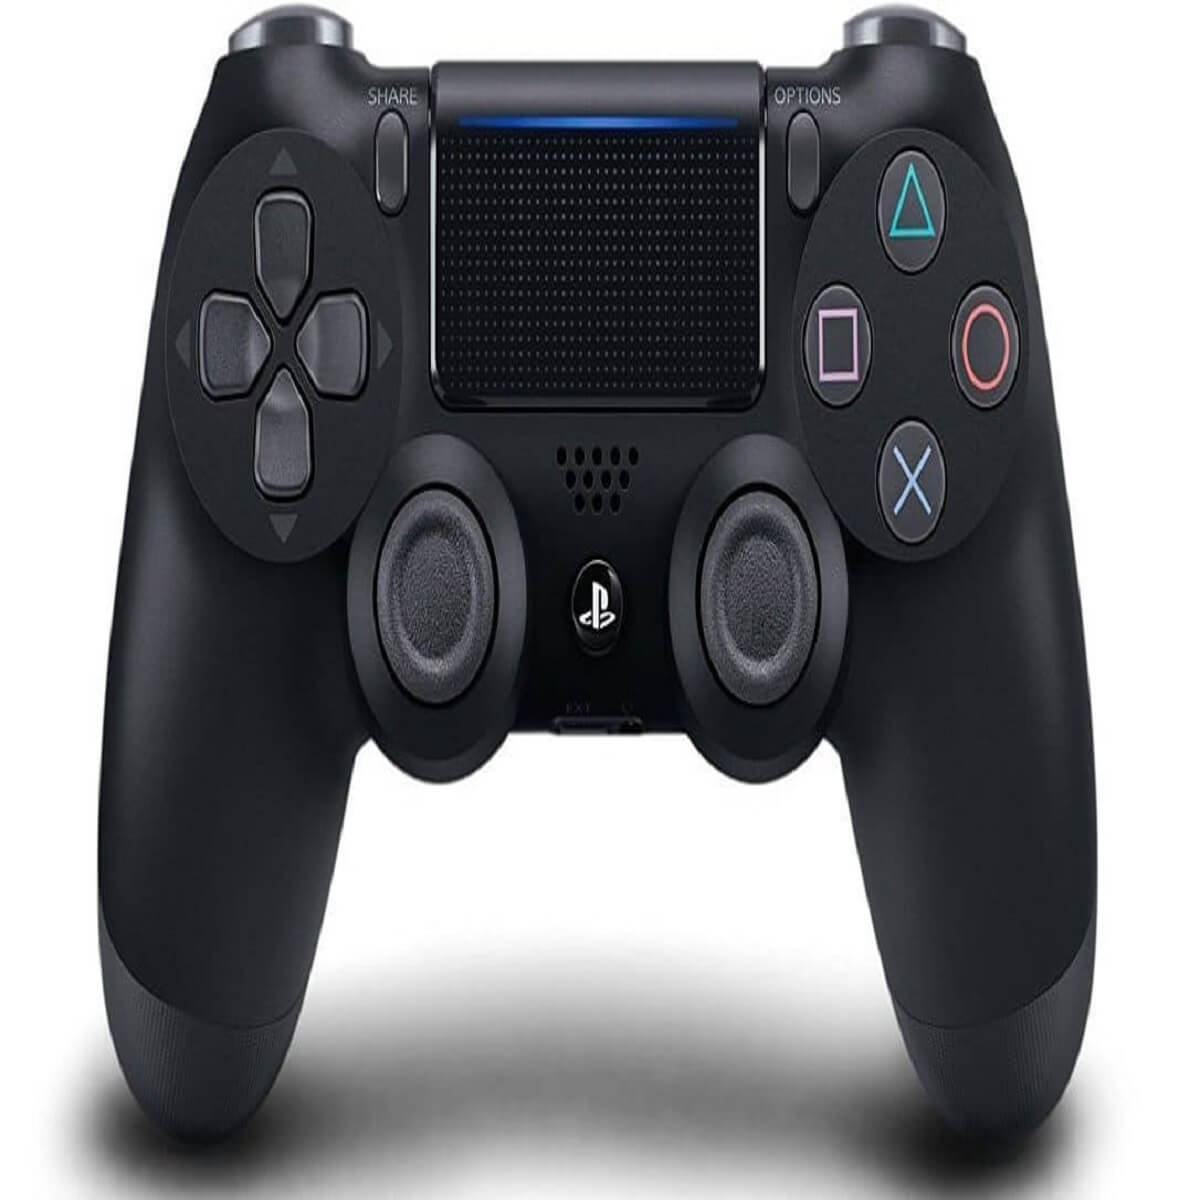 do I Steam my PS4 controller?